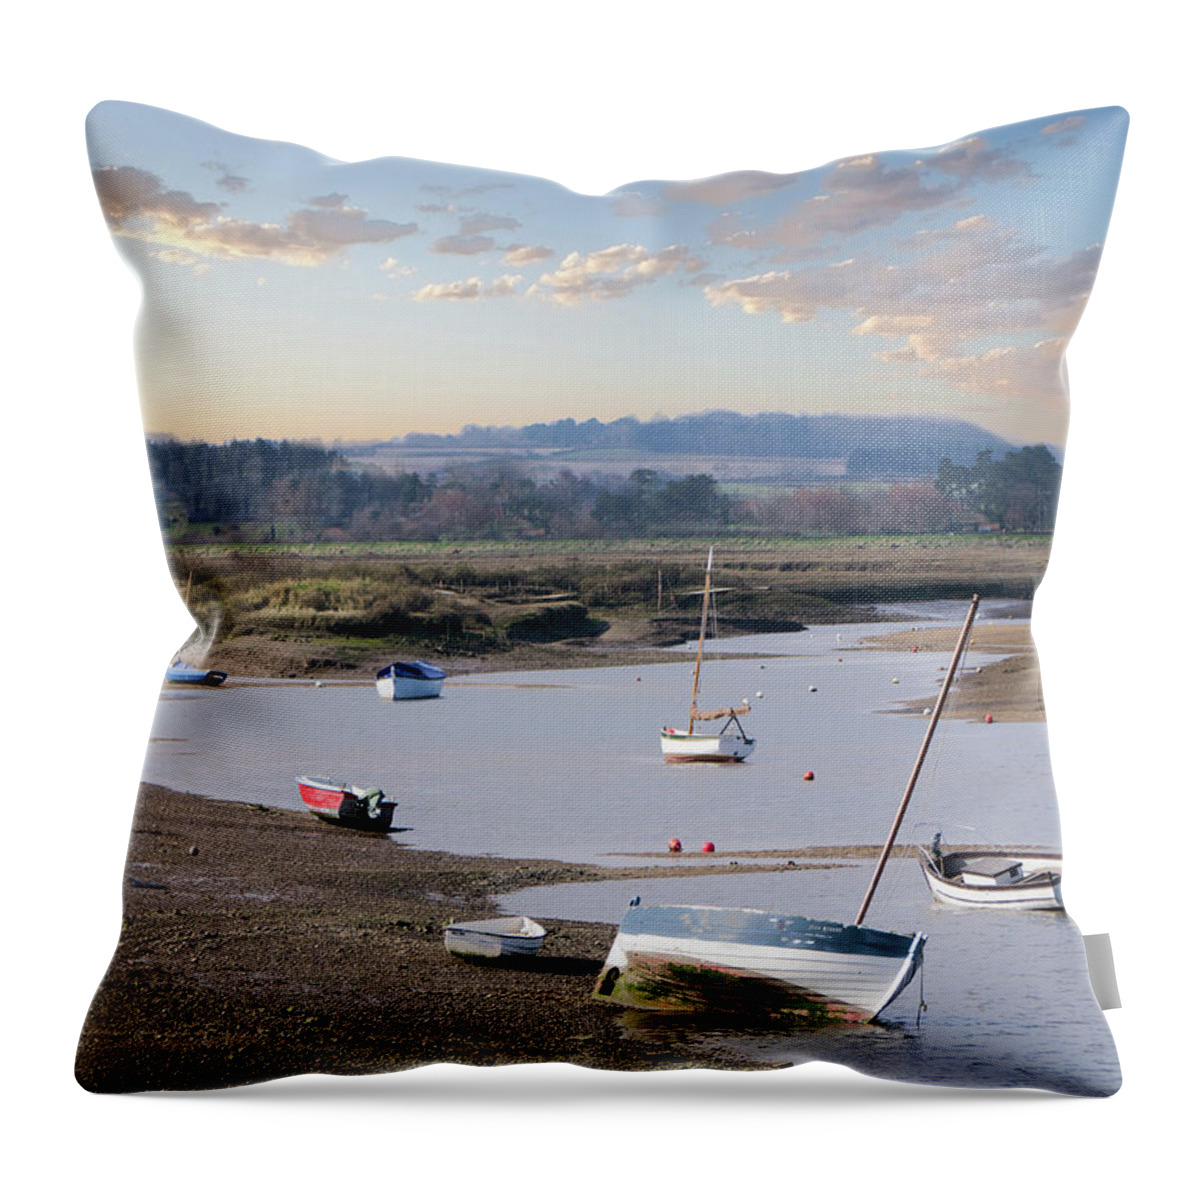 Burnham Overy Throw Pillow featuring the photograph Burnham Overy North Norfolk by John Hartley